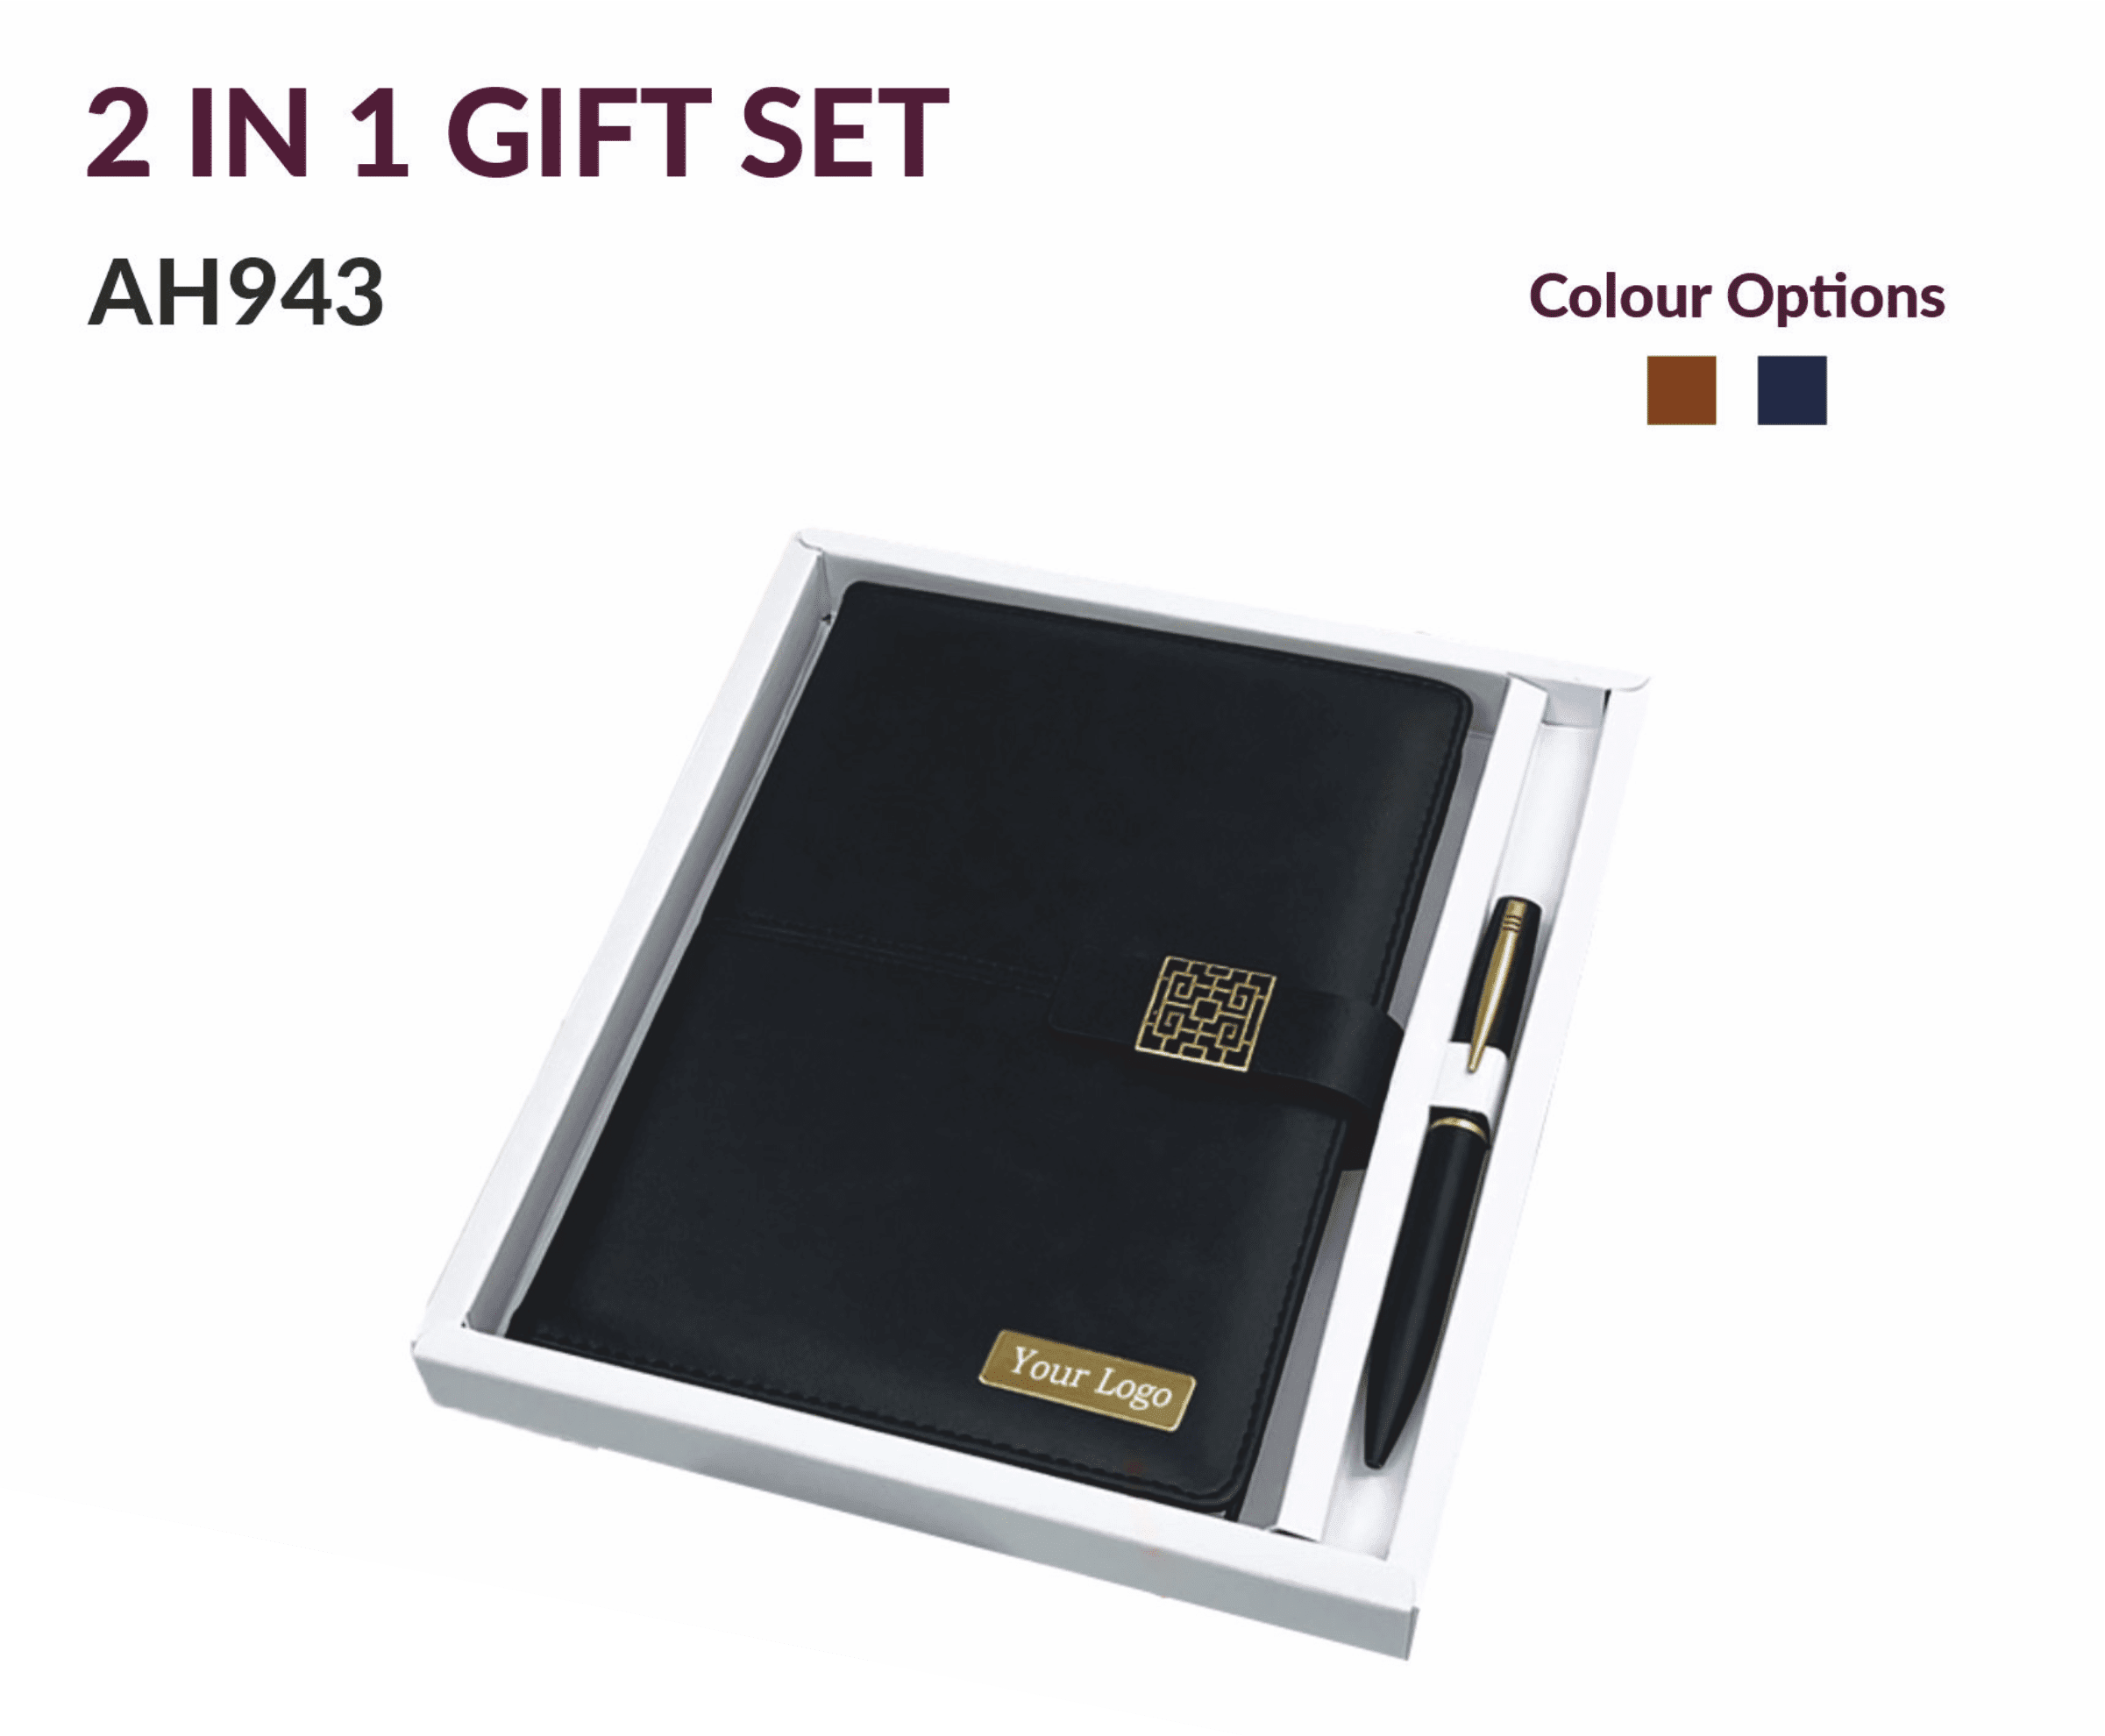 2 IN 1 GIFT SET